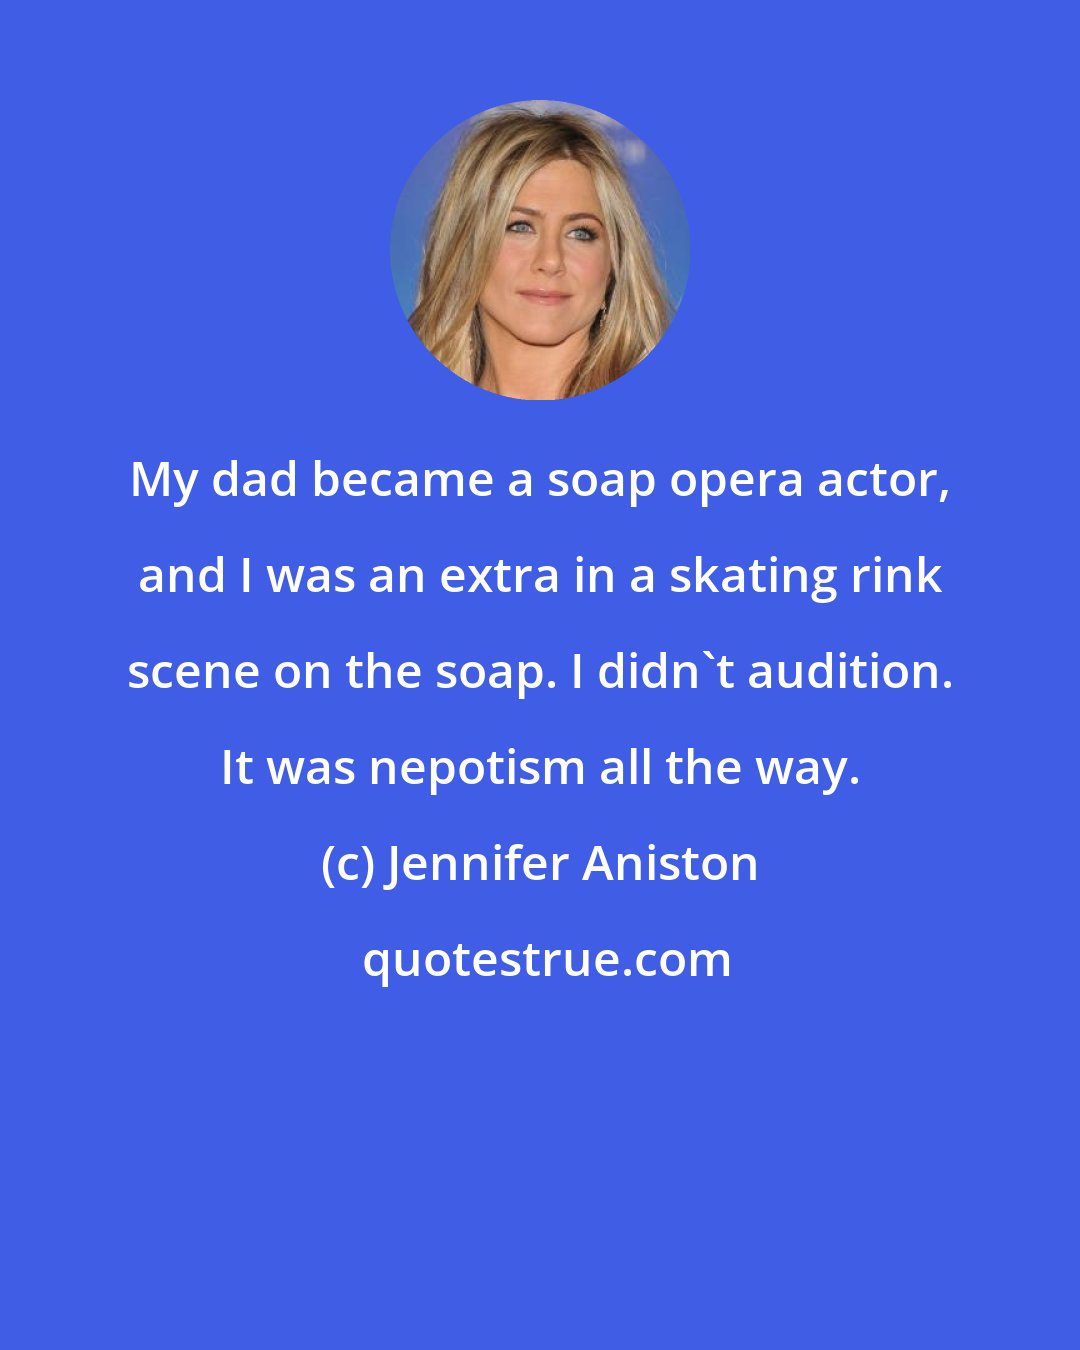 Jennifer Aniston: My dad became a soap opera actor, and I was an extra in a skating rink scene on the soap. I didn't audition. It was nepotism all the way.